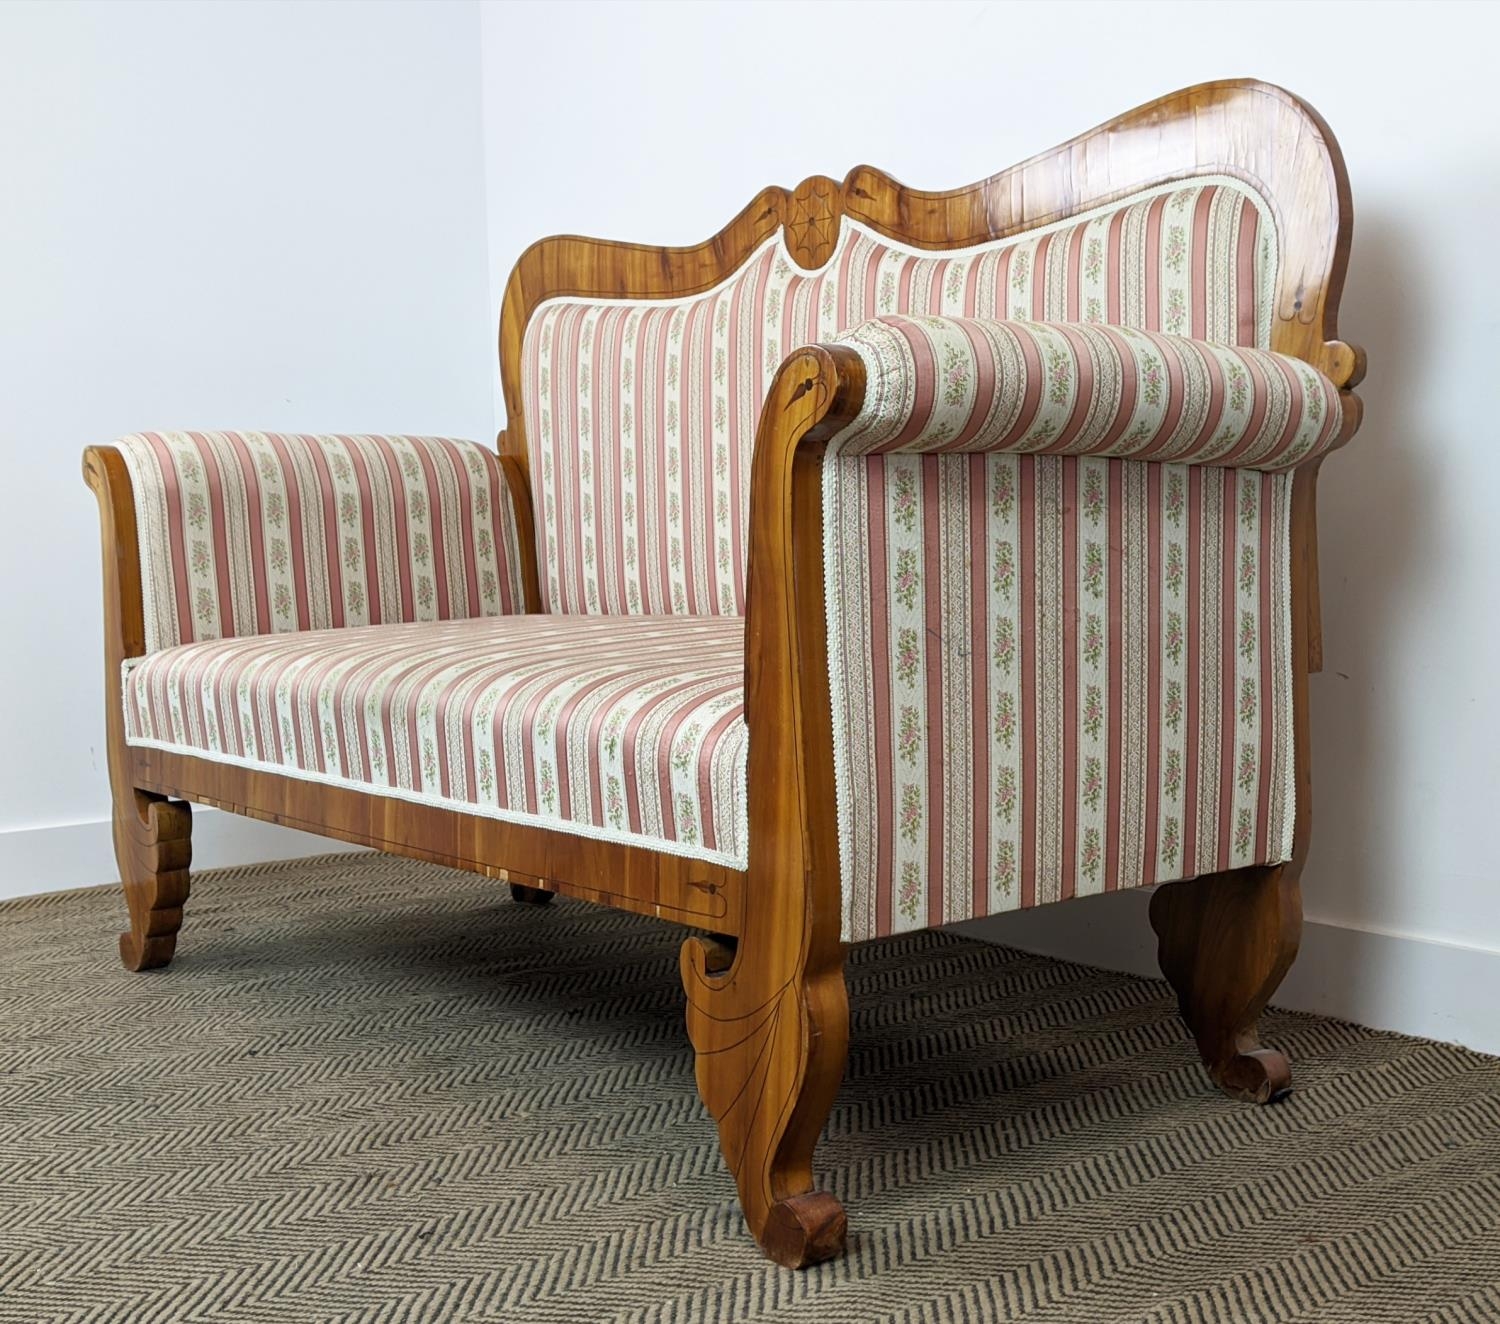 SOFA, Biedermeier cherrywood and line inlaid with pink striped upholstery, 104cm H x 168cm x 68cm. - Image 8 of 24